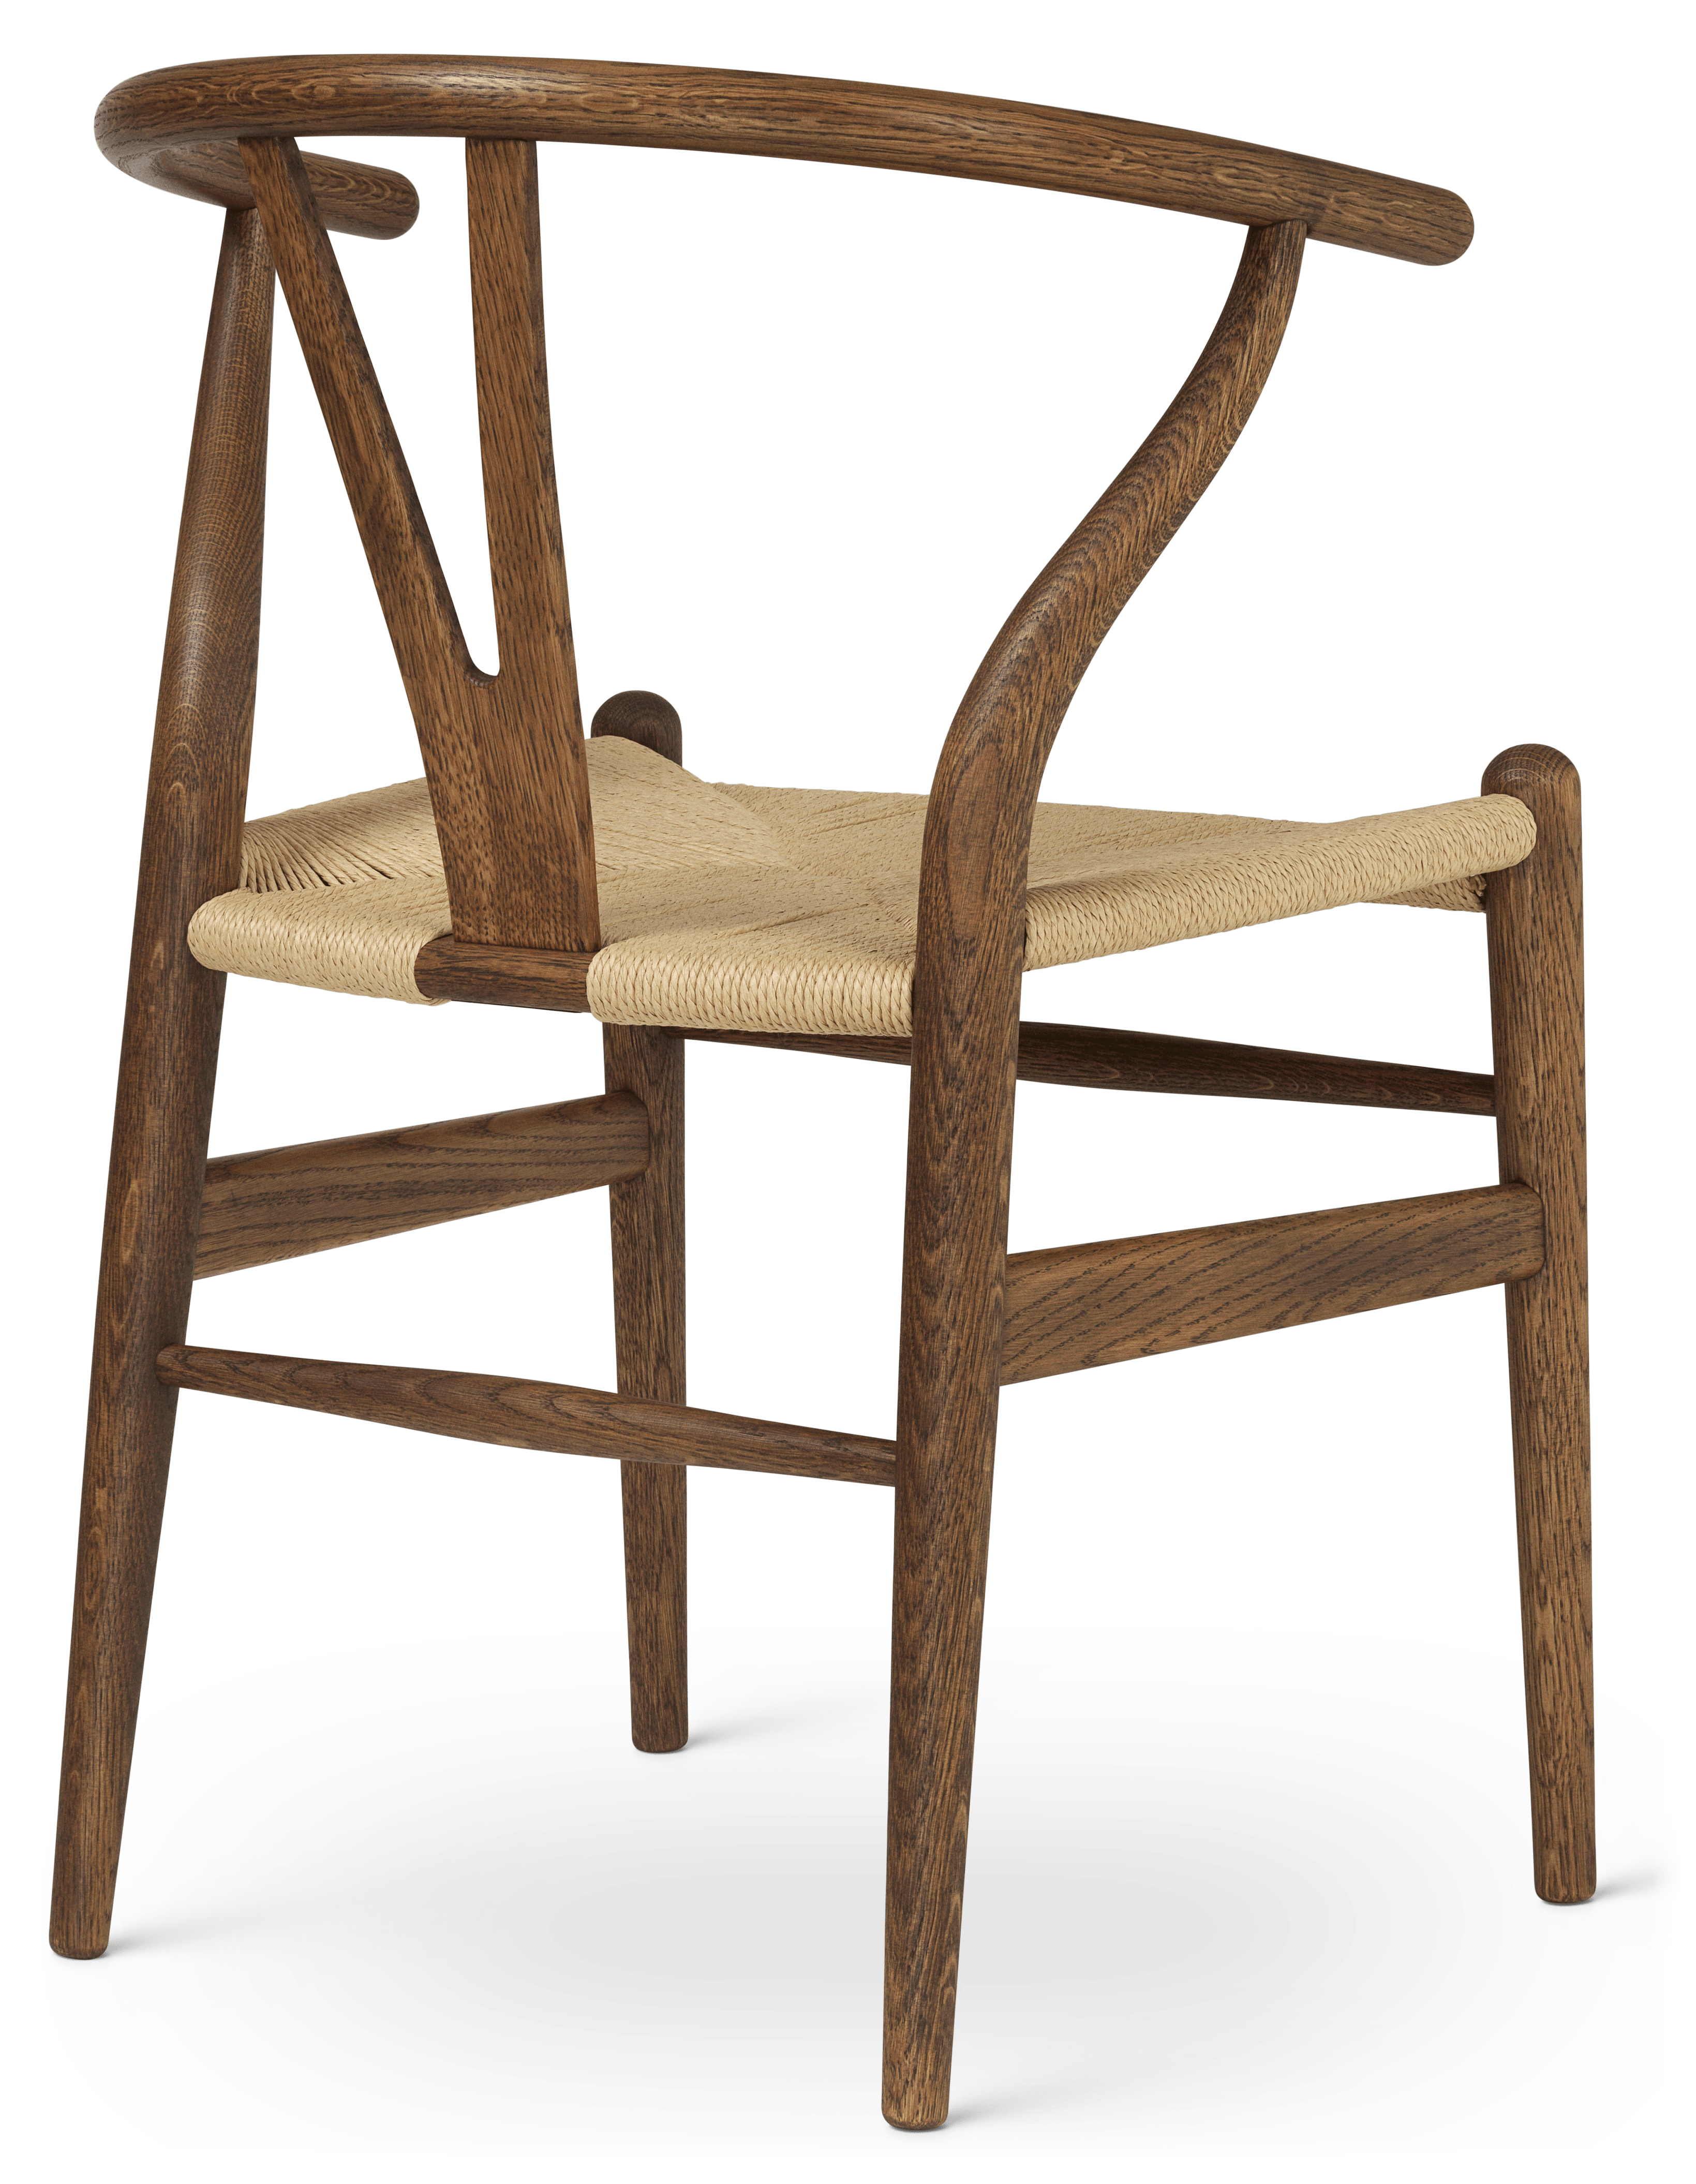 https://admincms.carlhansen.com/globalassets/products/chairs/ch24/smoked-oil/ch24_oak_smokedoil_papercord_natural_back2.png